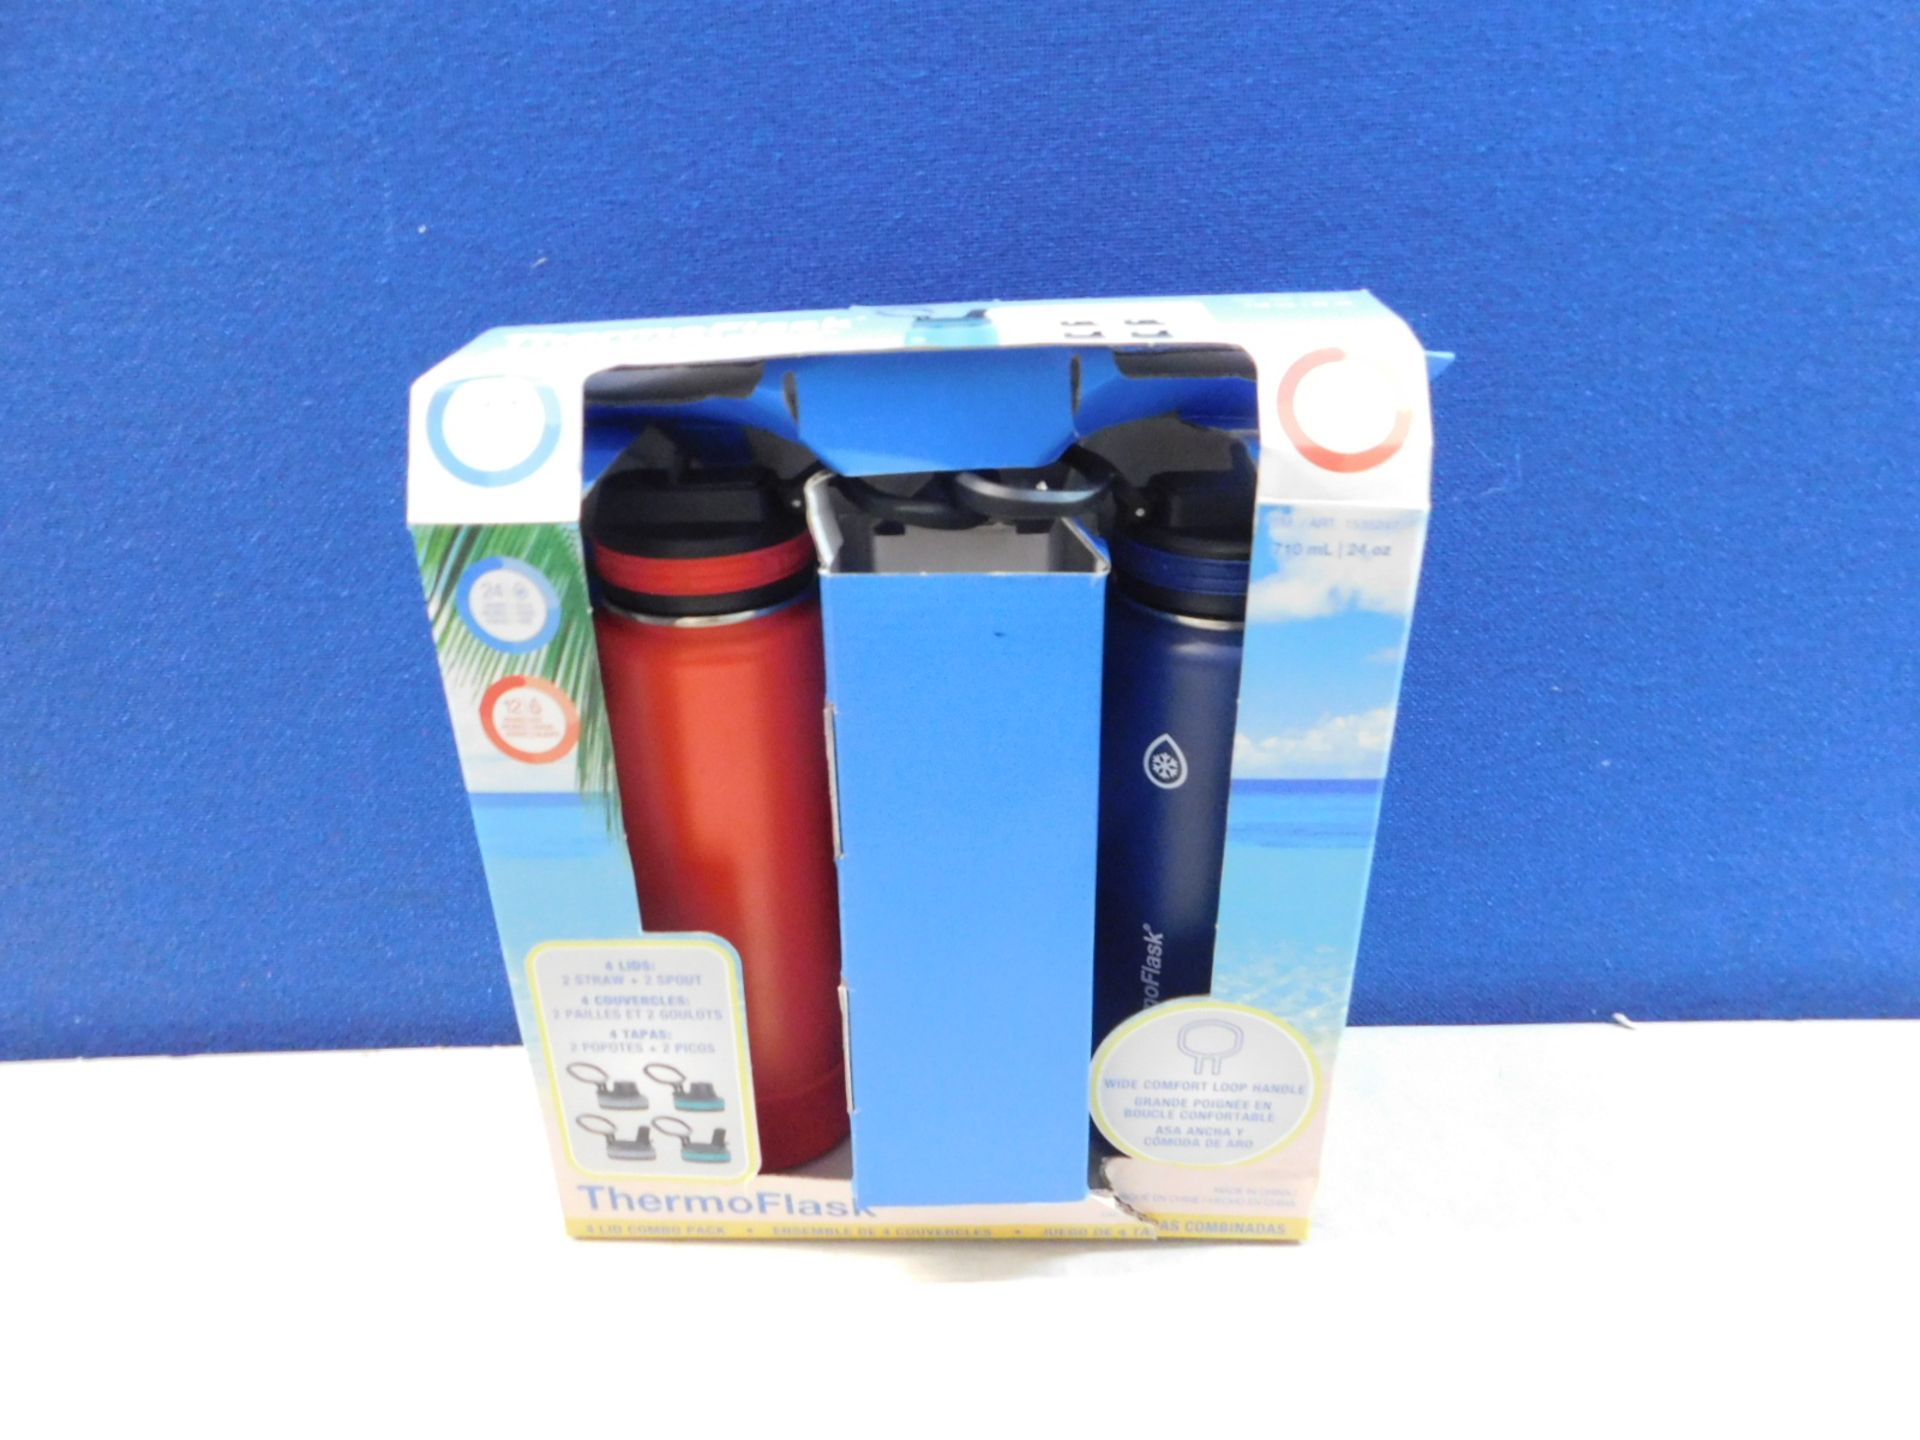 1 BOXED SET OF 2 THERMOFLASK KIDS INSULATED STAINLESS STEEL WATER BOTTLES RRP Â£29.99